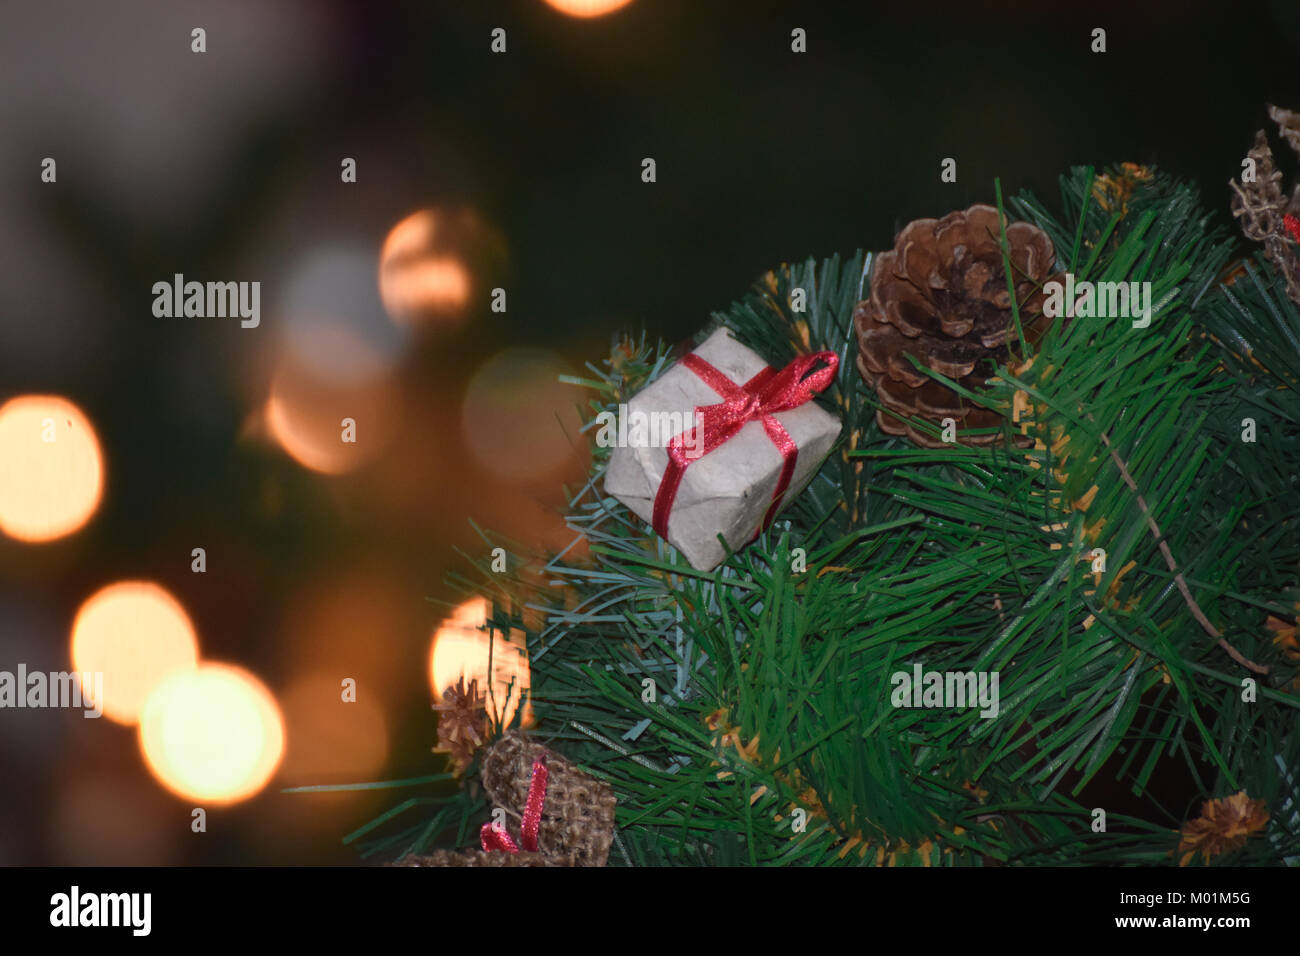 Christmas decoration with blurry light bokeh background Stock Photo